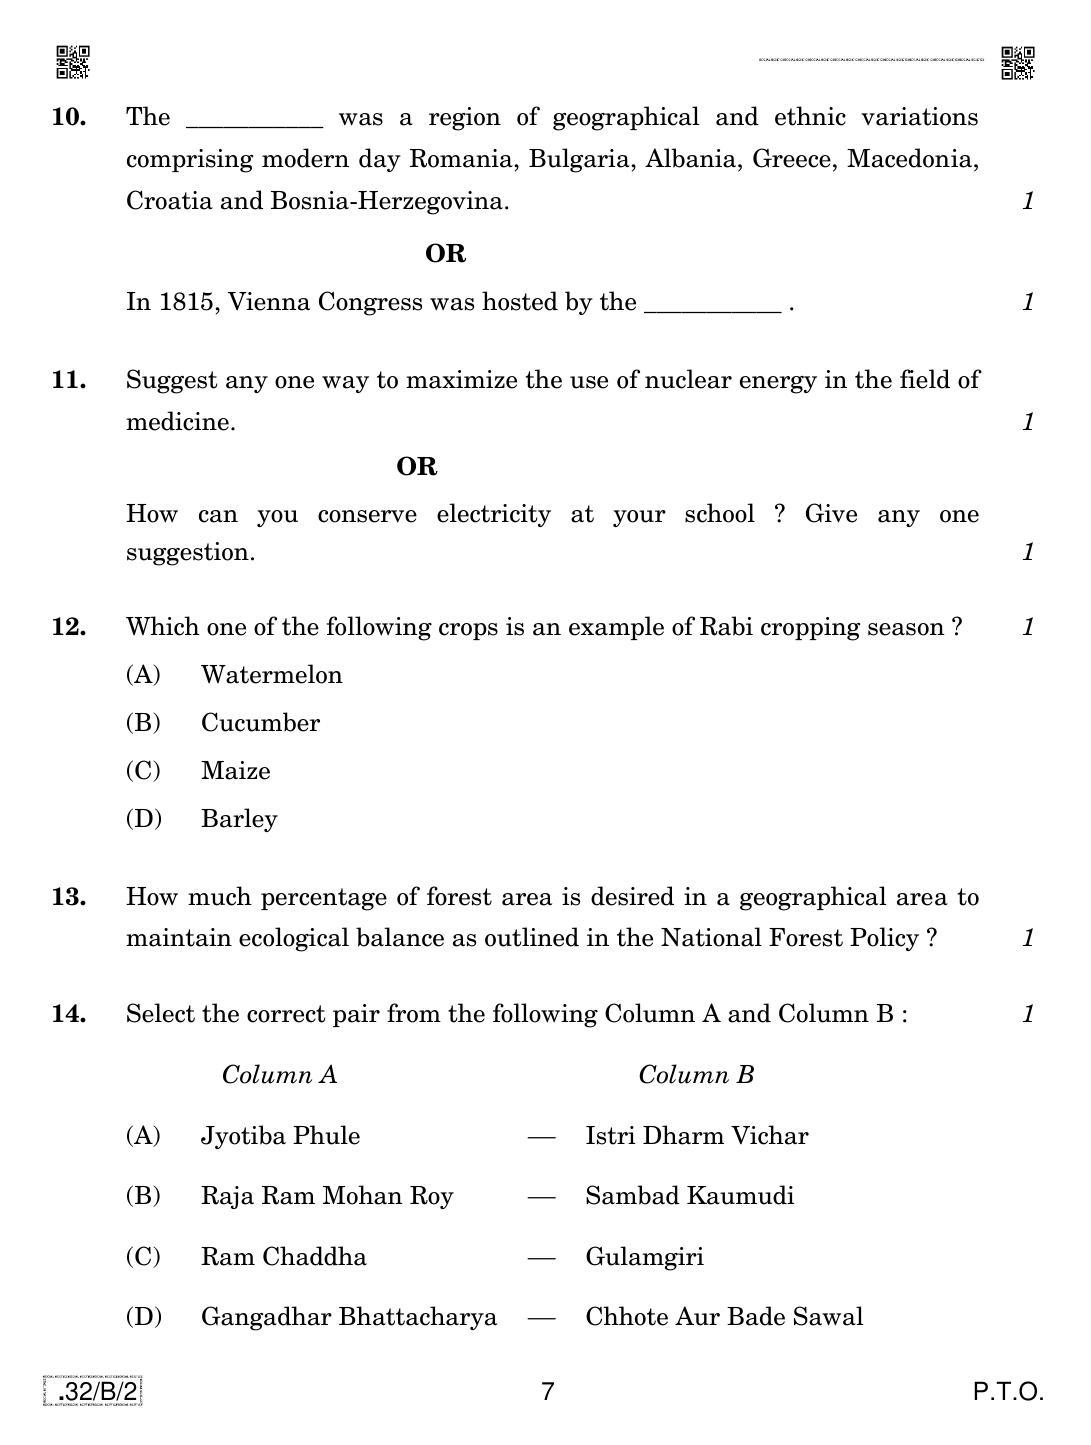 CBSE Class 10 32-C-2 Social Science 2020 Compartment Question Paper - Page 7